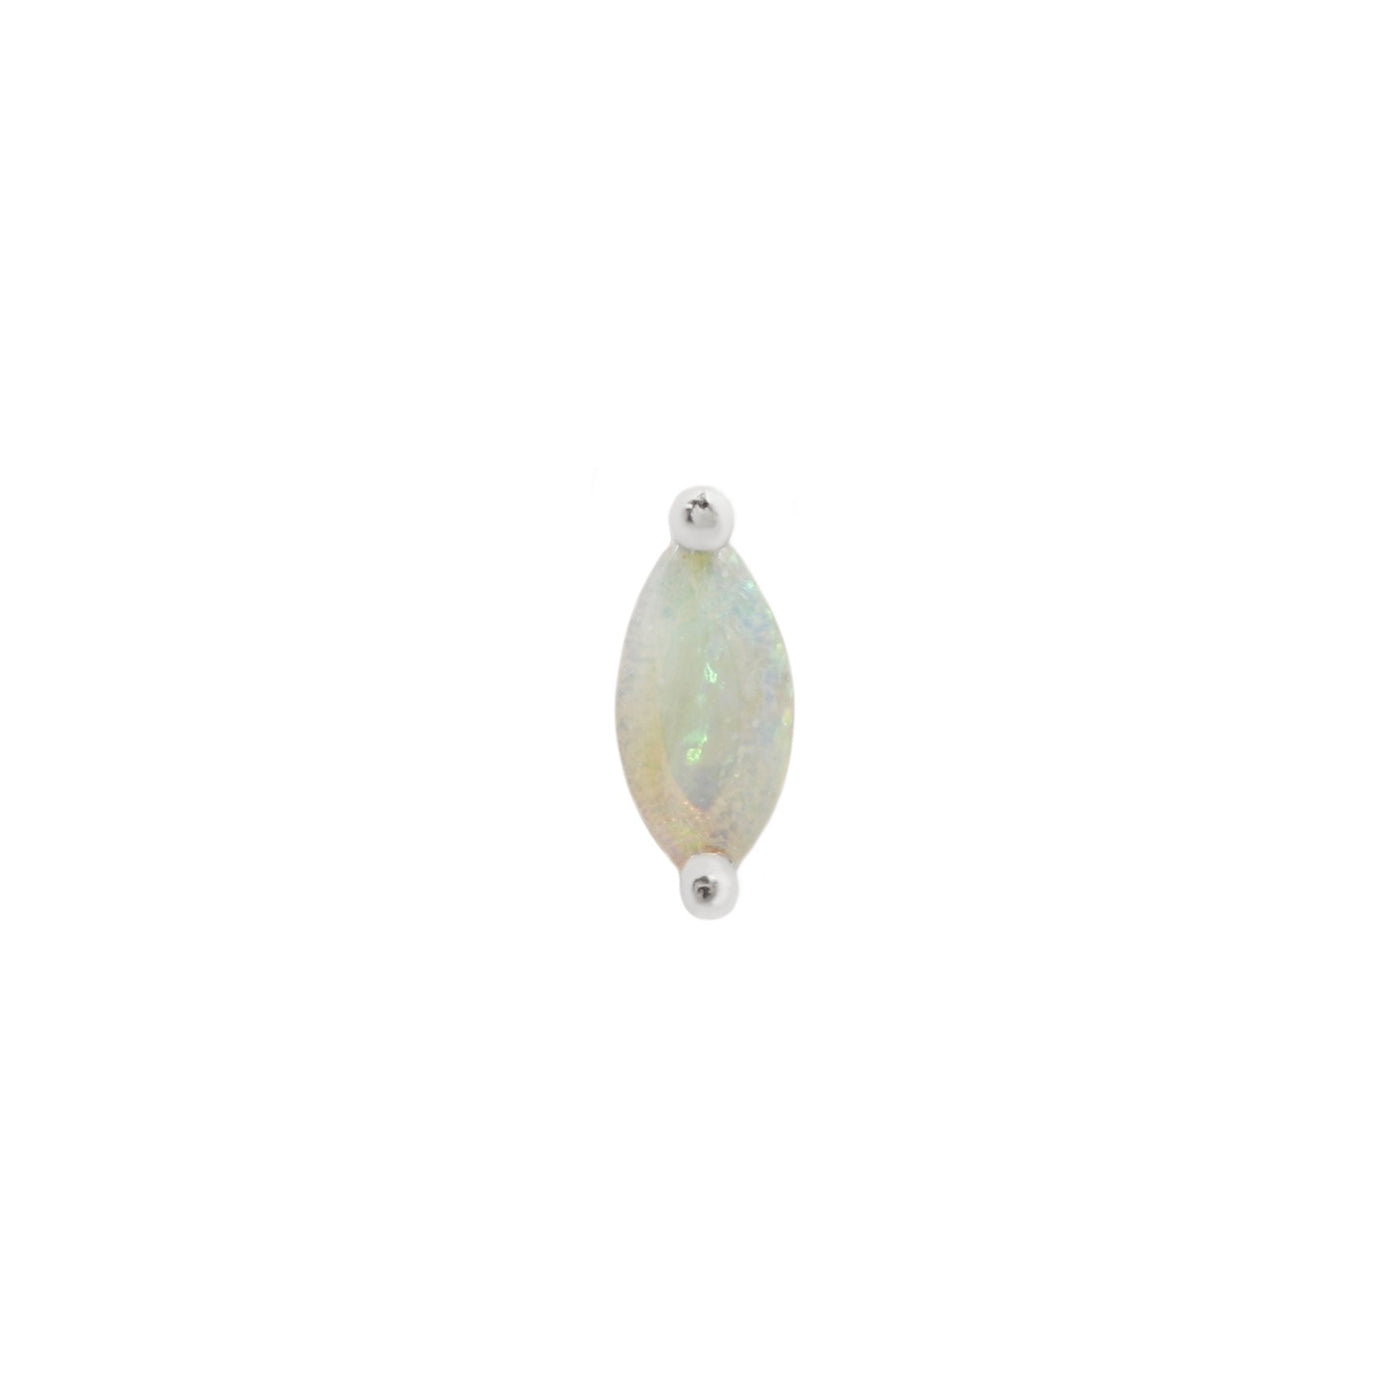 opal jewelry with two hand polished titanium beads on either end